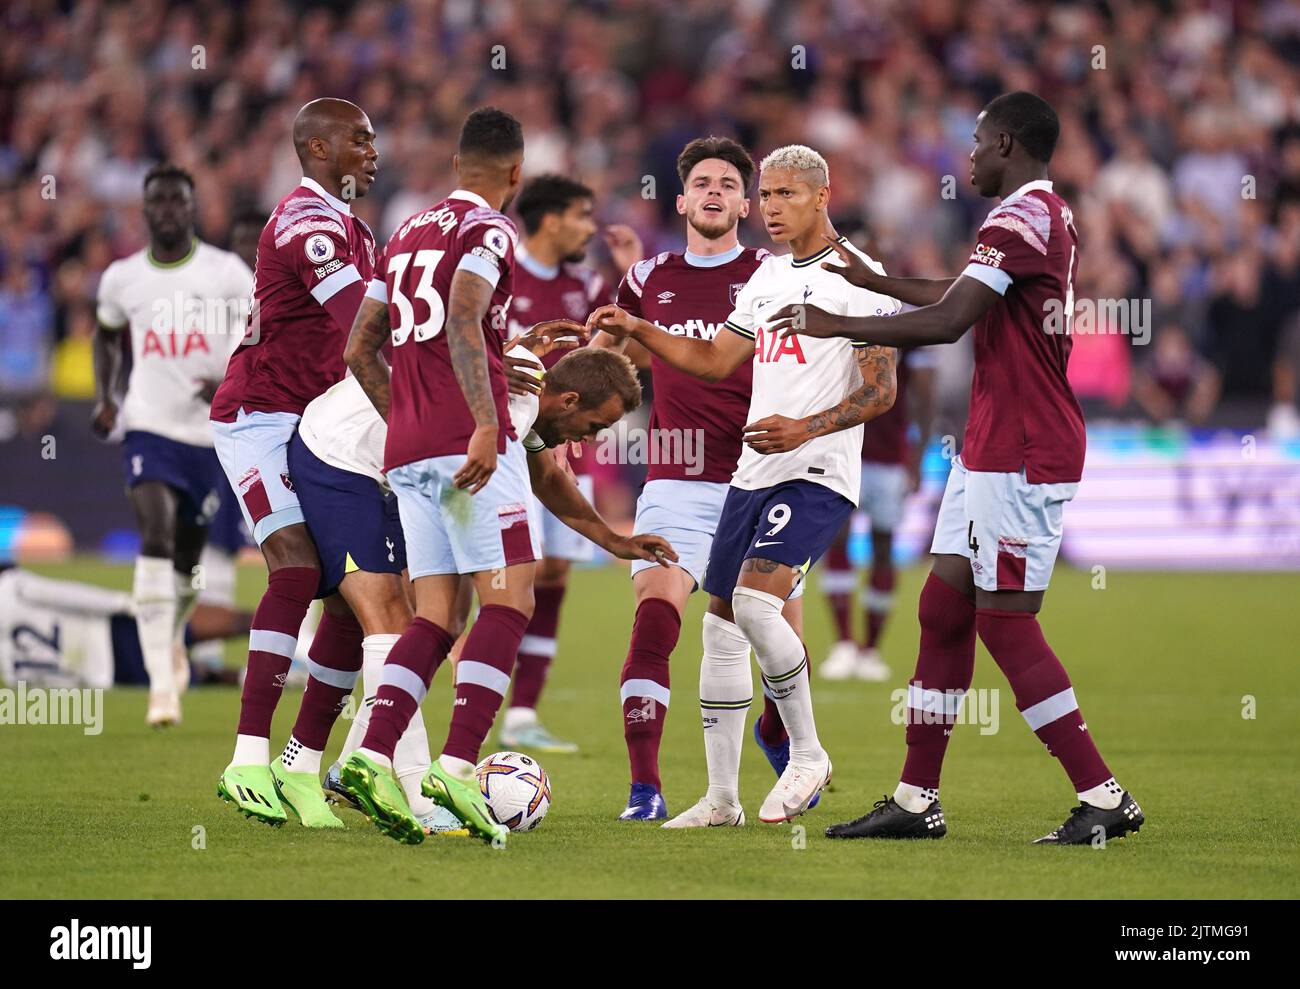 Tottenham Hotspur's Richarlison (second right) and West Ham United's dos Santos Emerson Palmieri (second left) are separated during the Premier League match at the London Stadium, London. Picture date: Wednesday August 31, 2022. Stock Photo